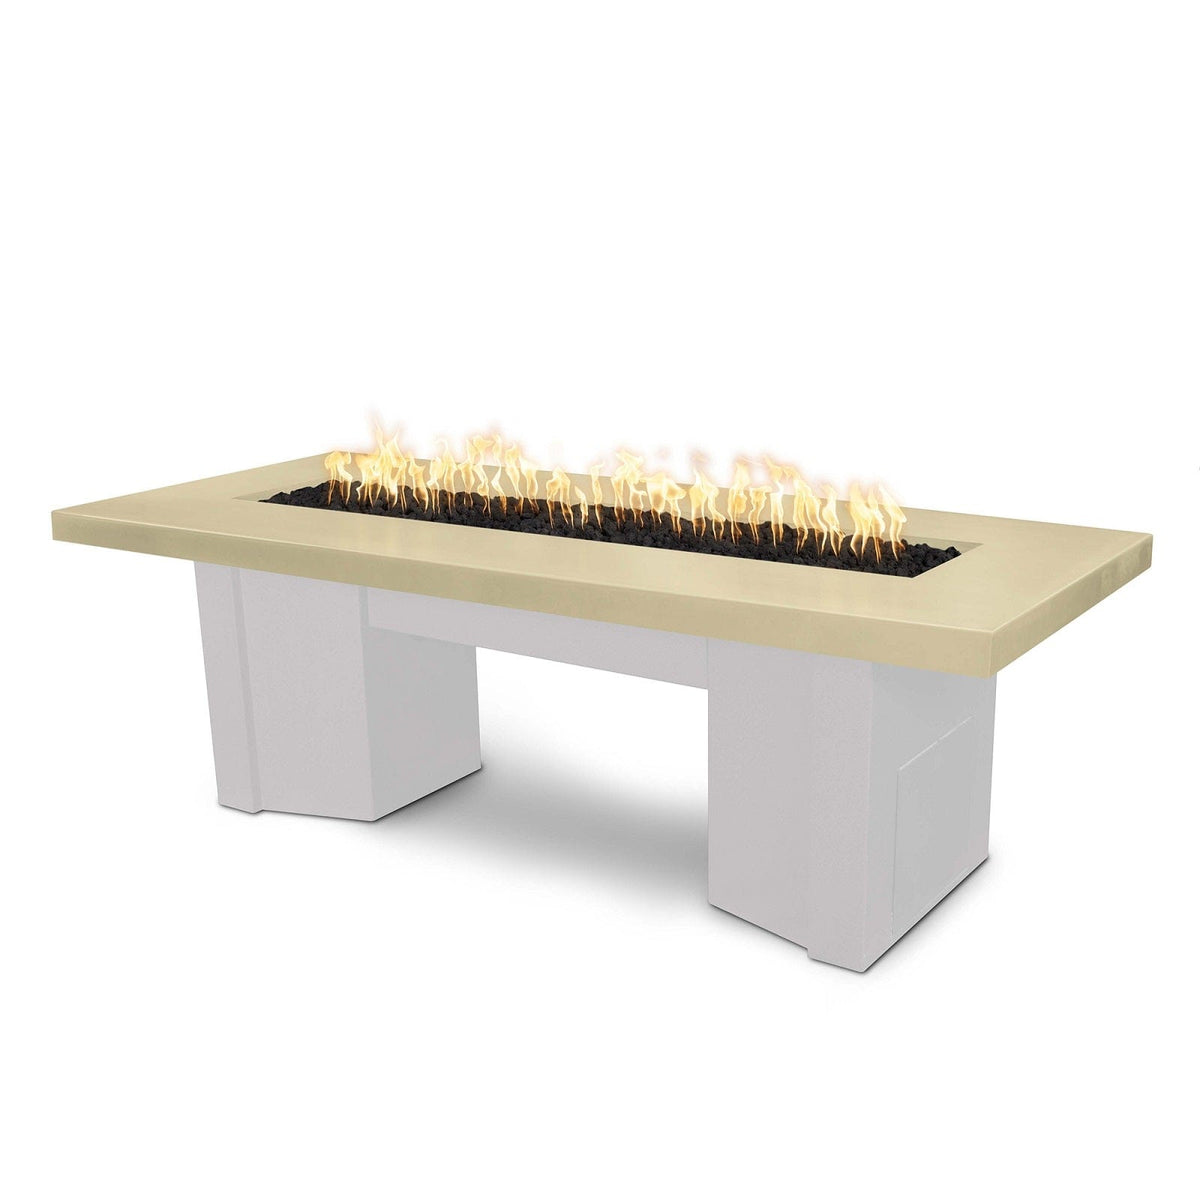 The Outdoor Plus Fire Features Vanilla (-VAN) / White Powder Coated Steel (-WHT) The Outdoor Plus 78&quot; Alameda Fire Table Smooth Concrete in Liquid Propane - Flame Sense System with Push Button Spark Igniter / OPT-ALMGFRC78FSEN-LP